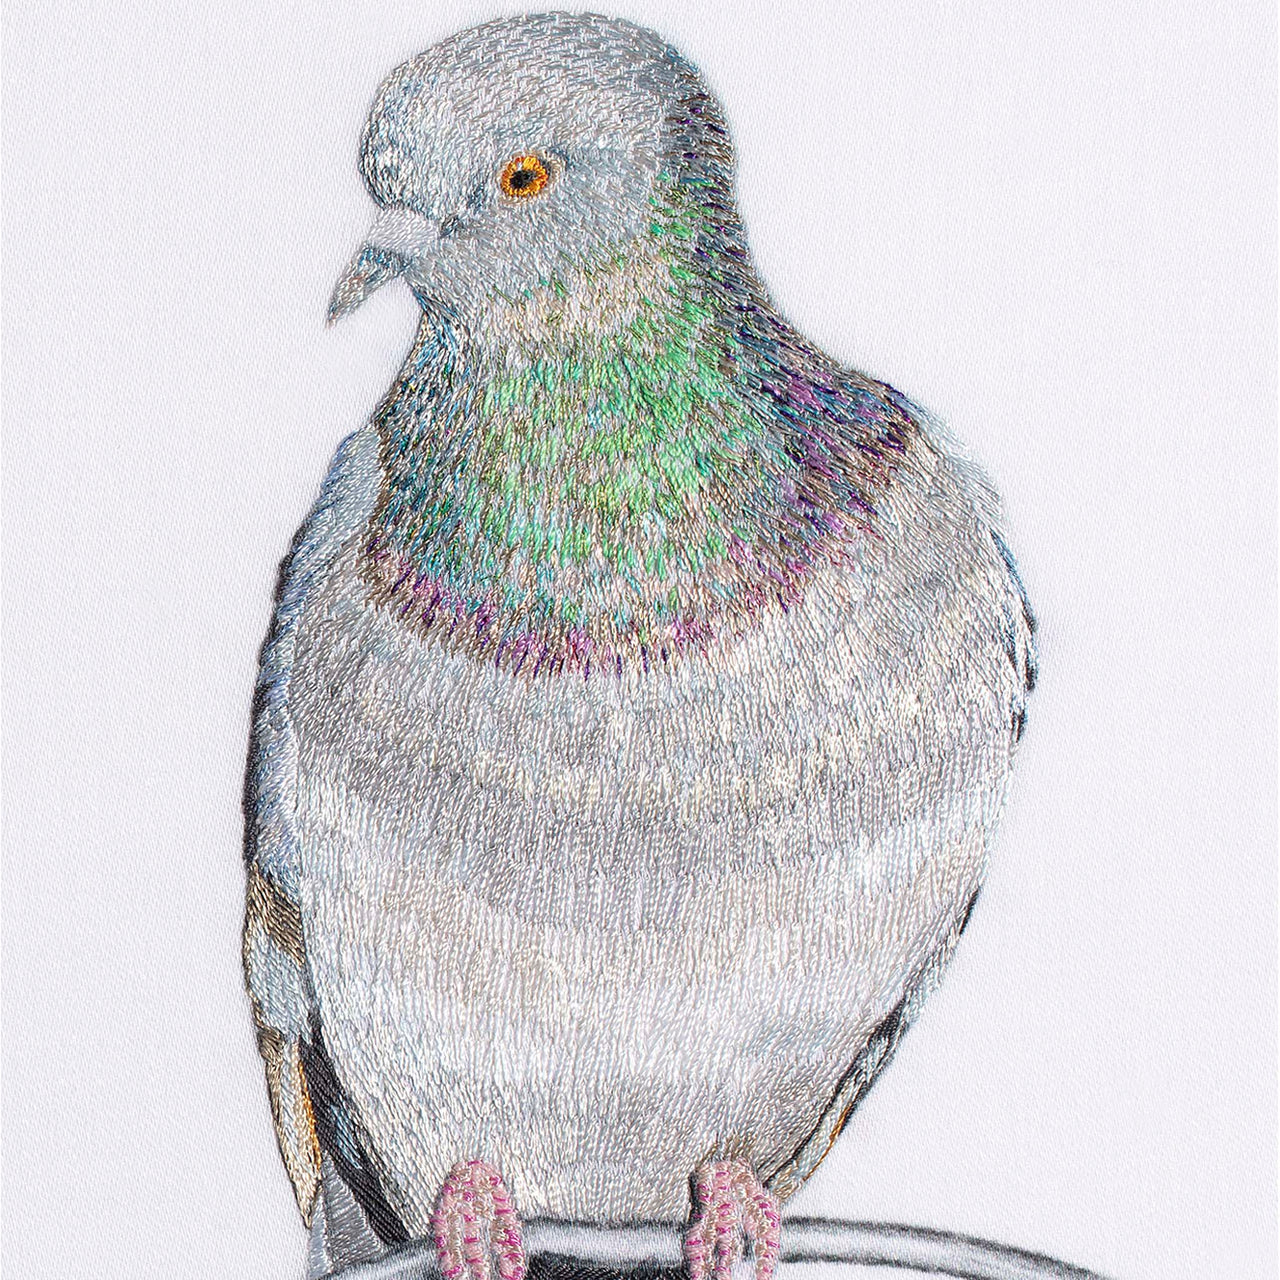 Limited edition print of hand embroidered pigeon